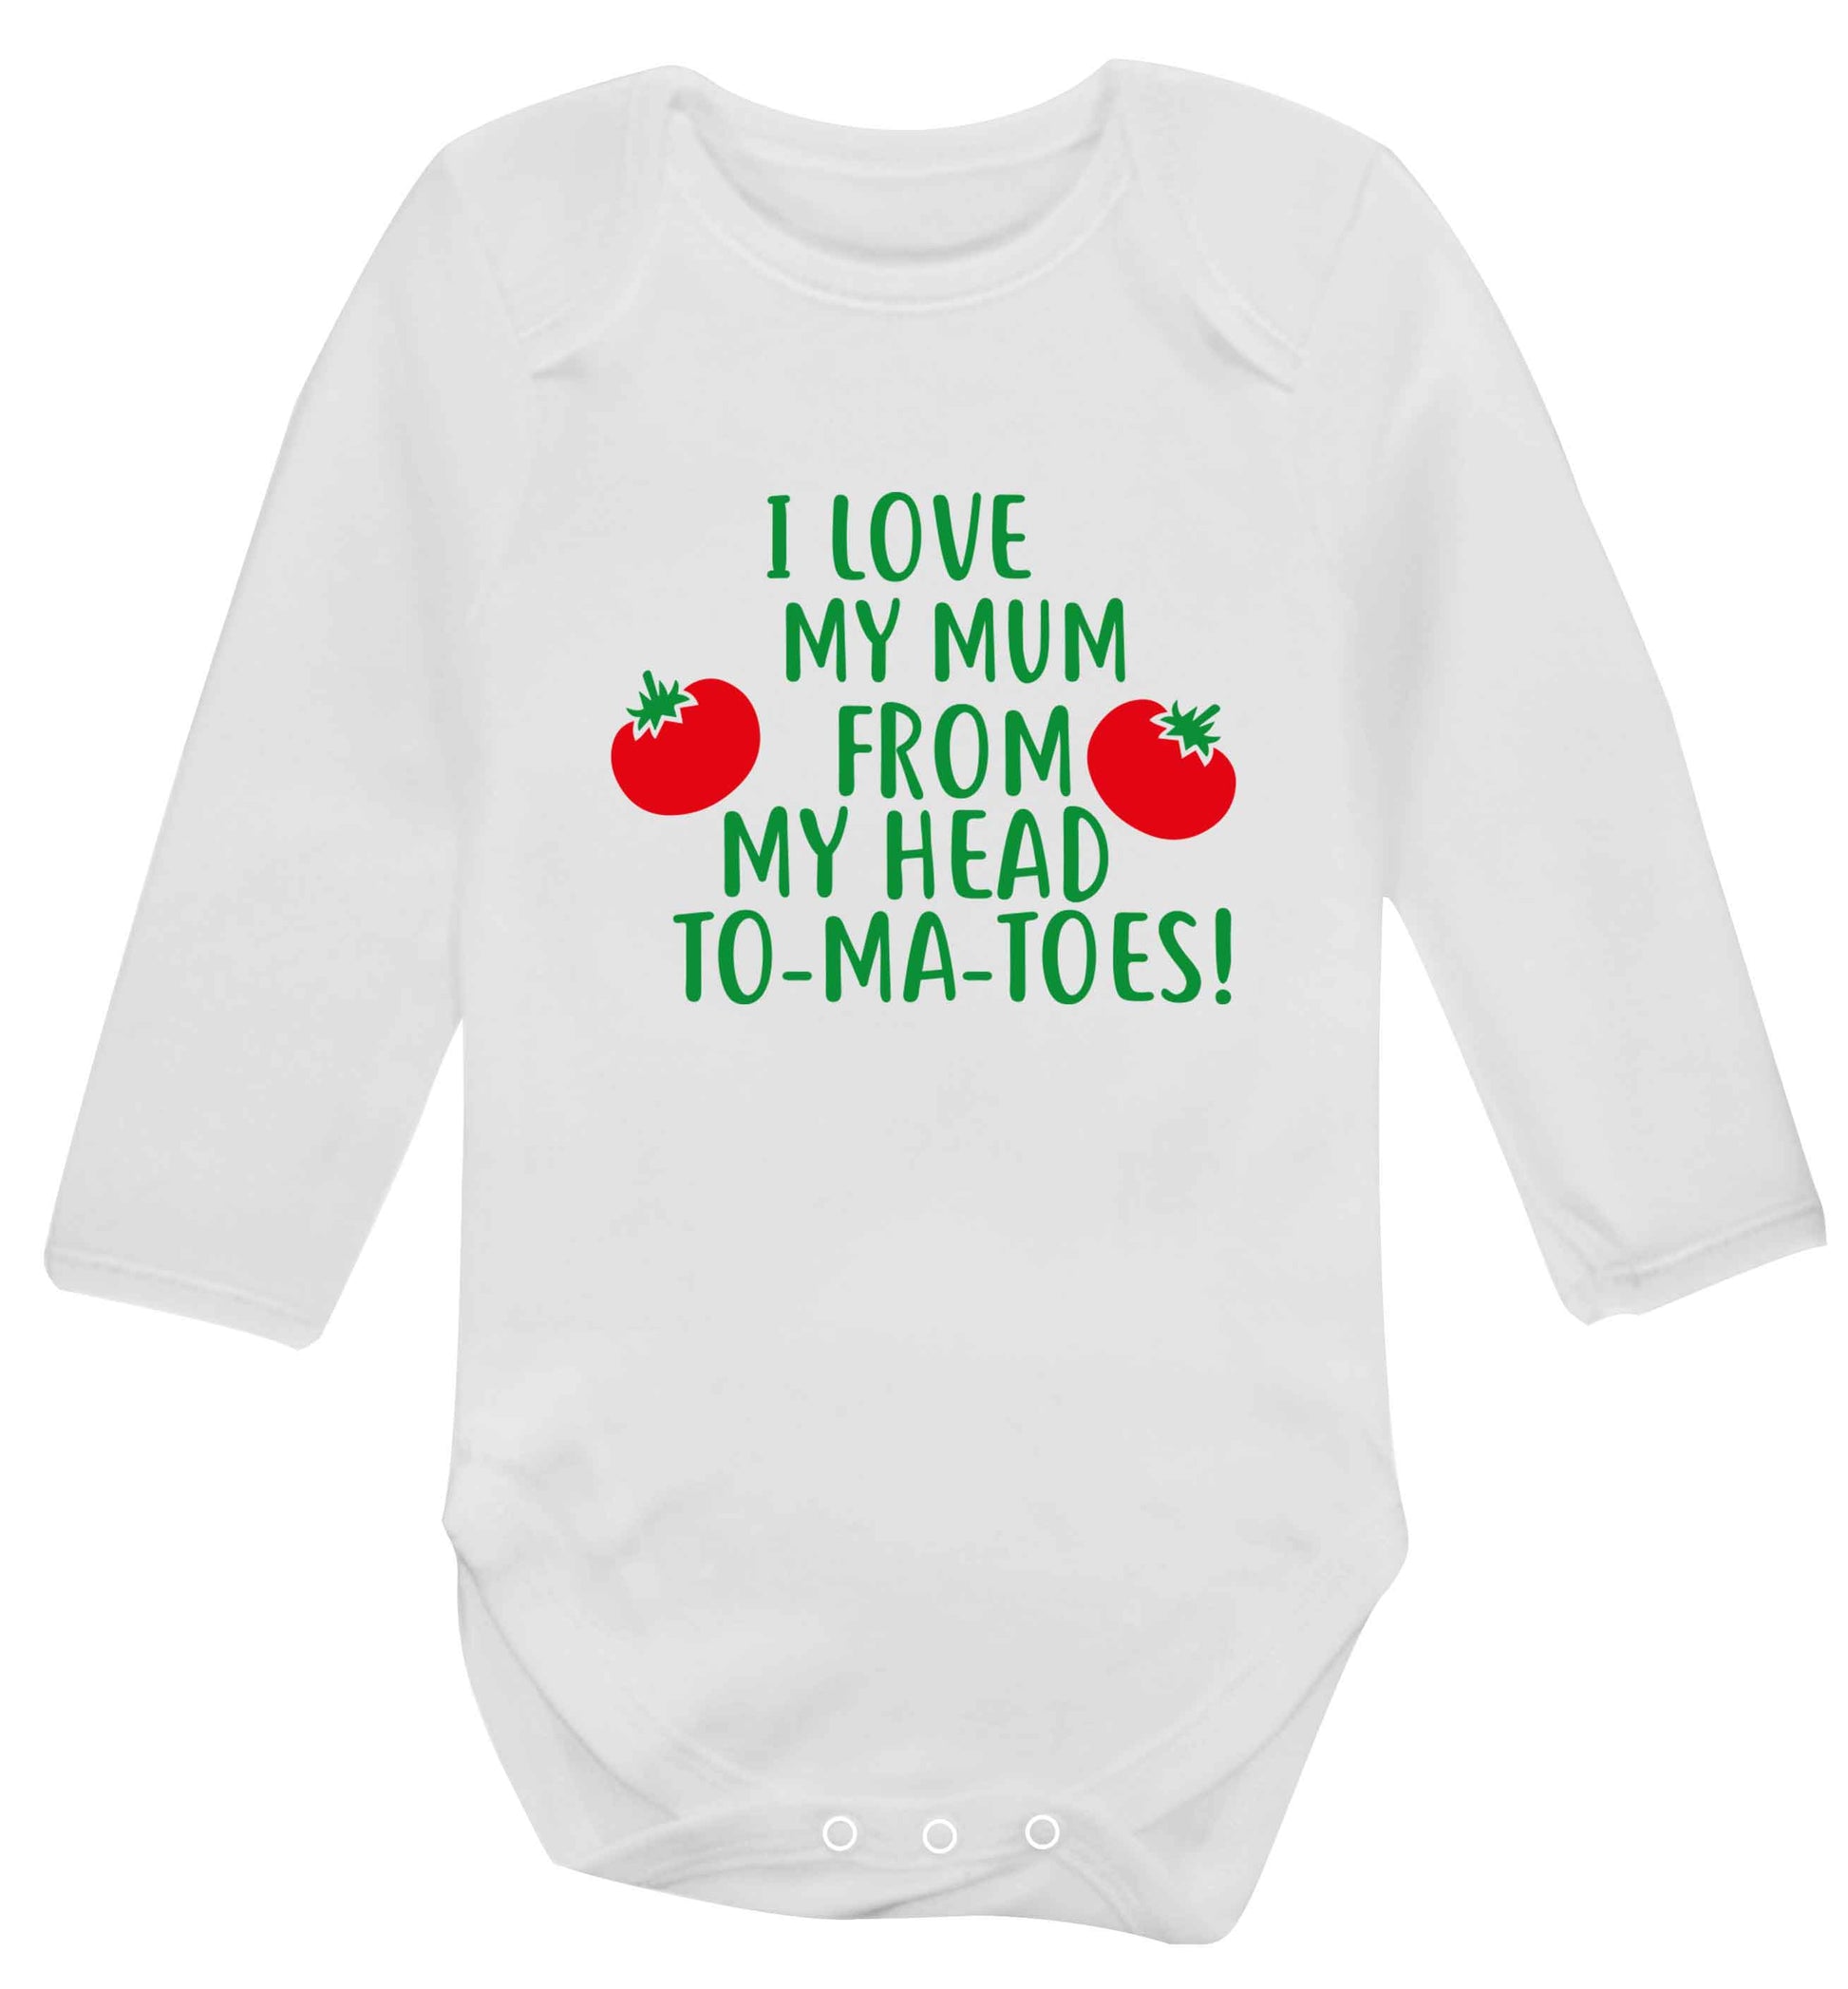 I love my mum from my head to-my-toes! baby vest long sleeved white 6-12 months